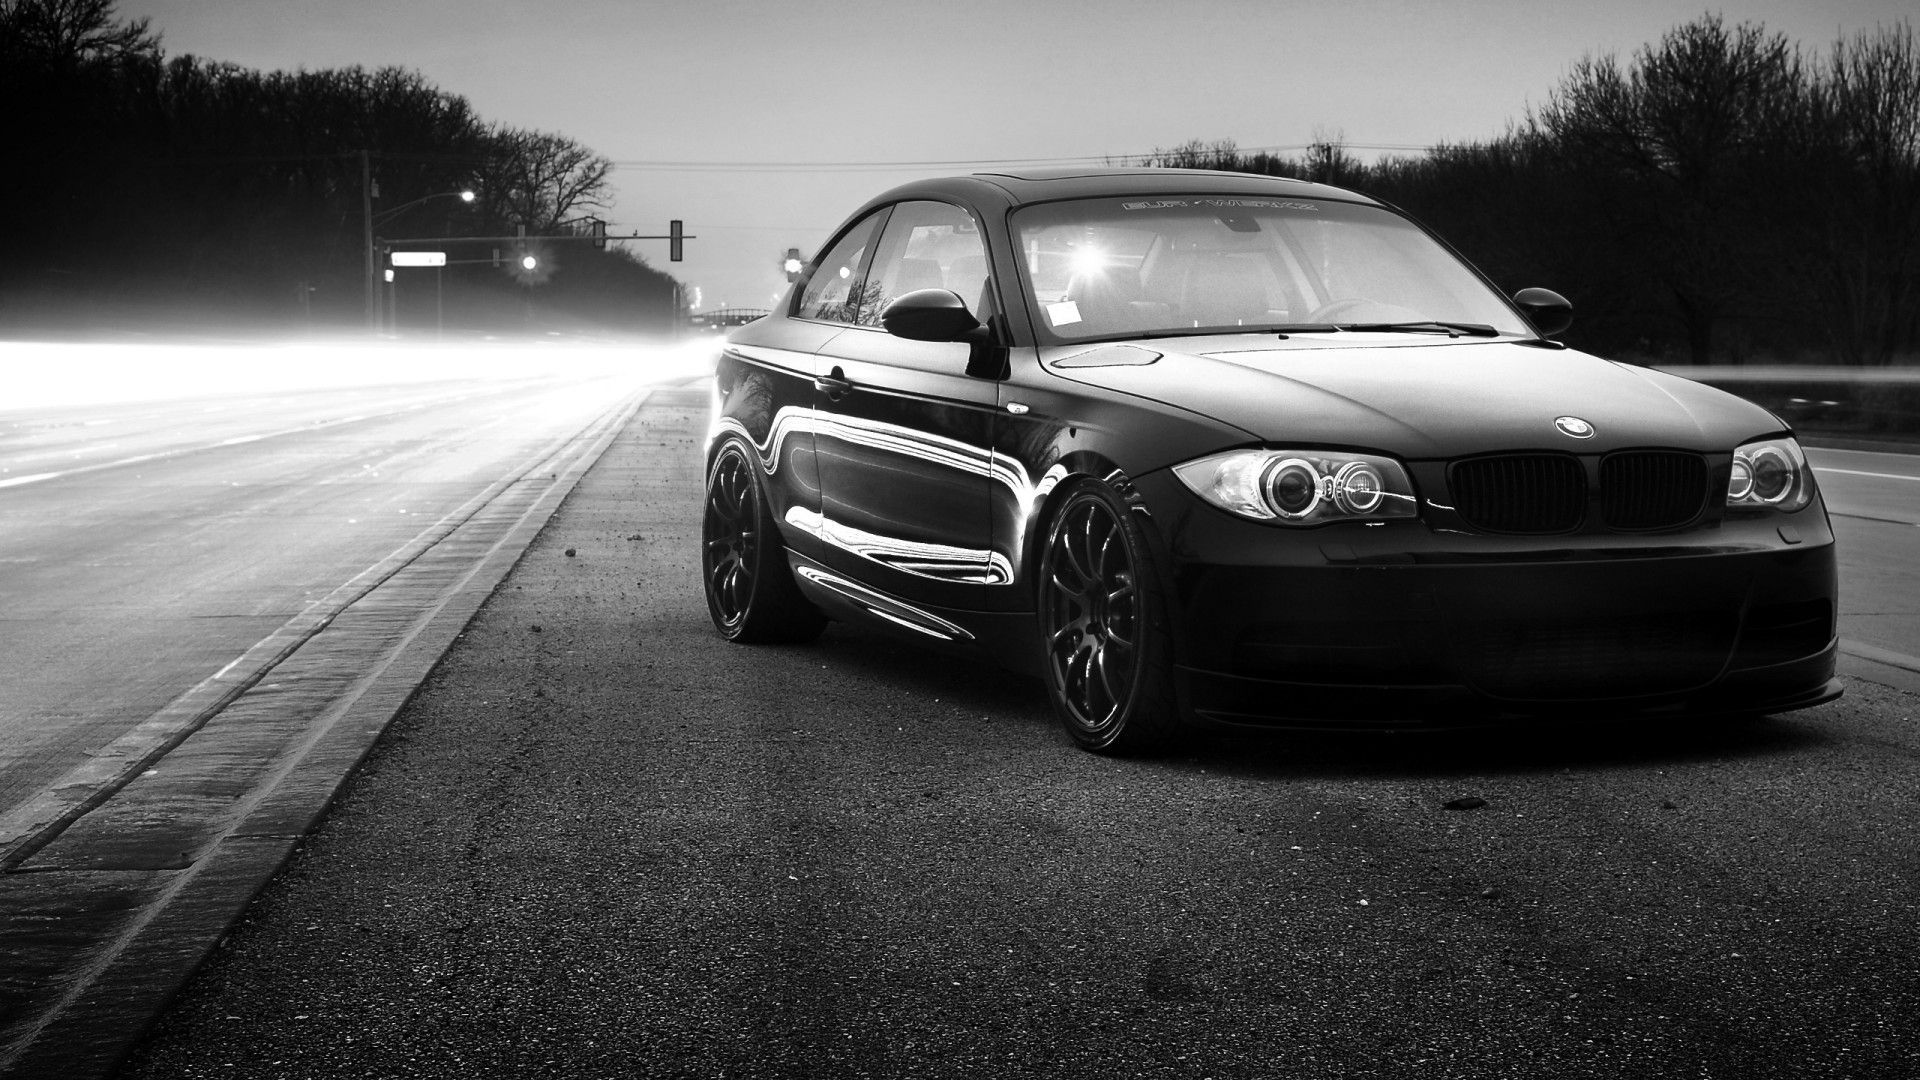 Black Car Wallpapers Pictures For Macbook Pro - AutomotiveCool